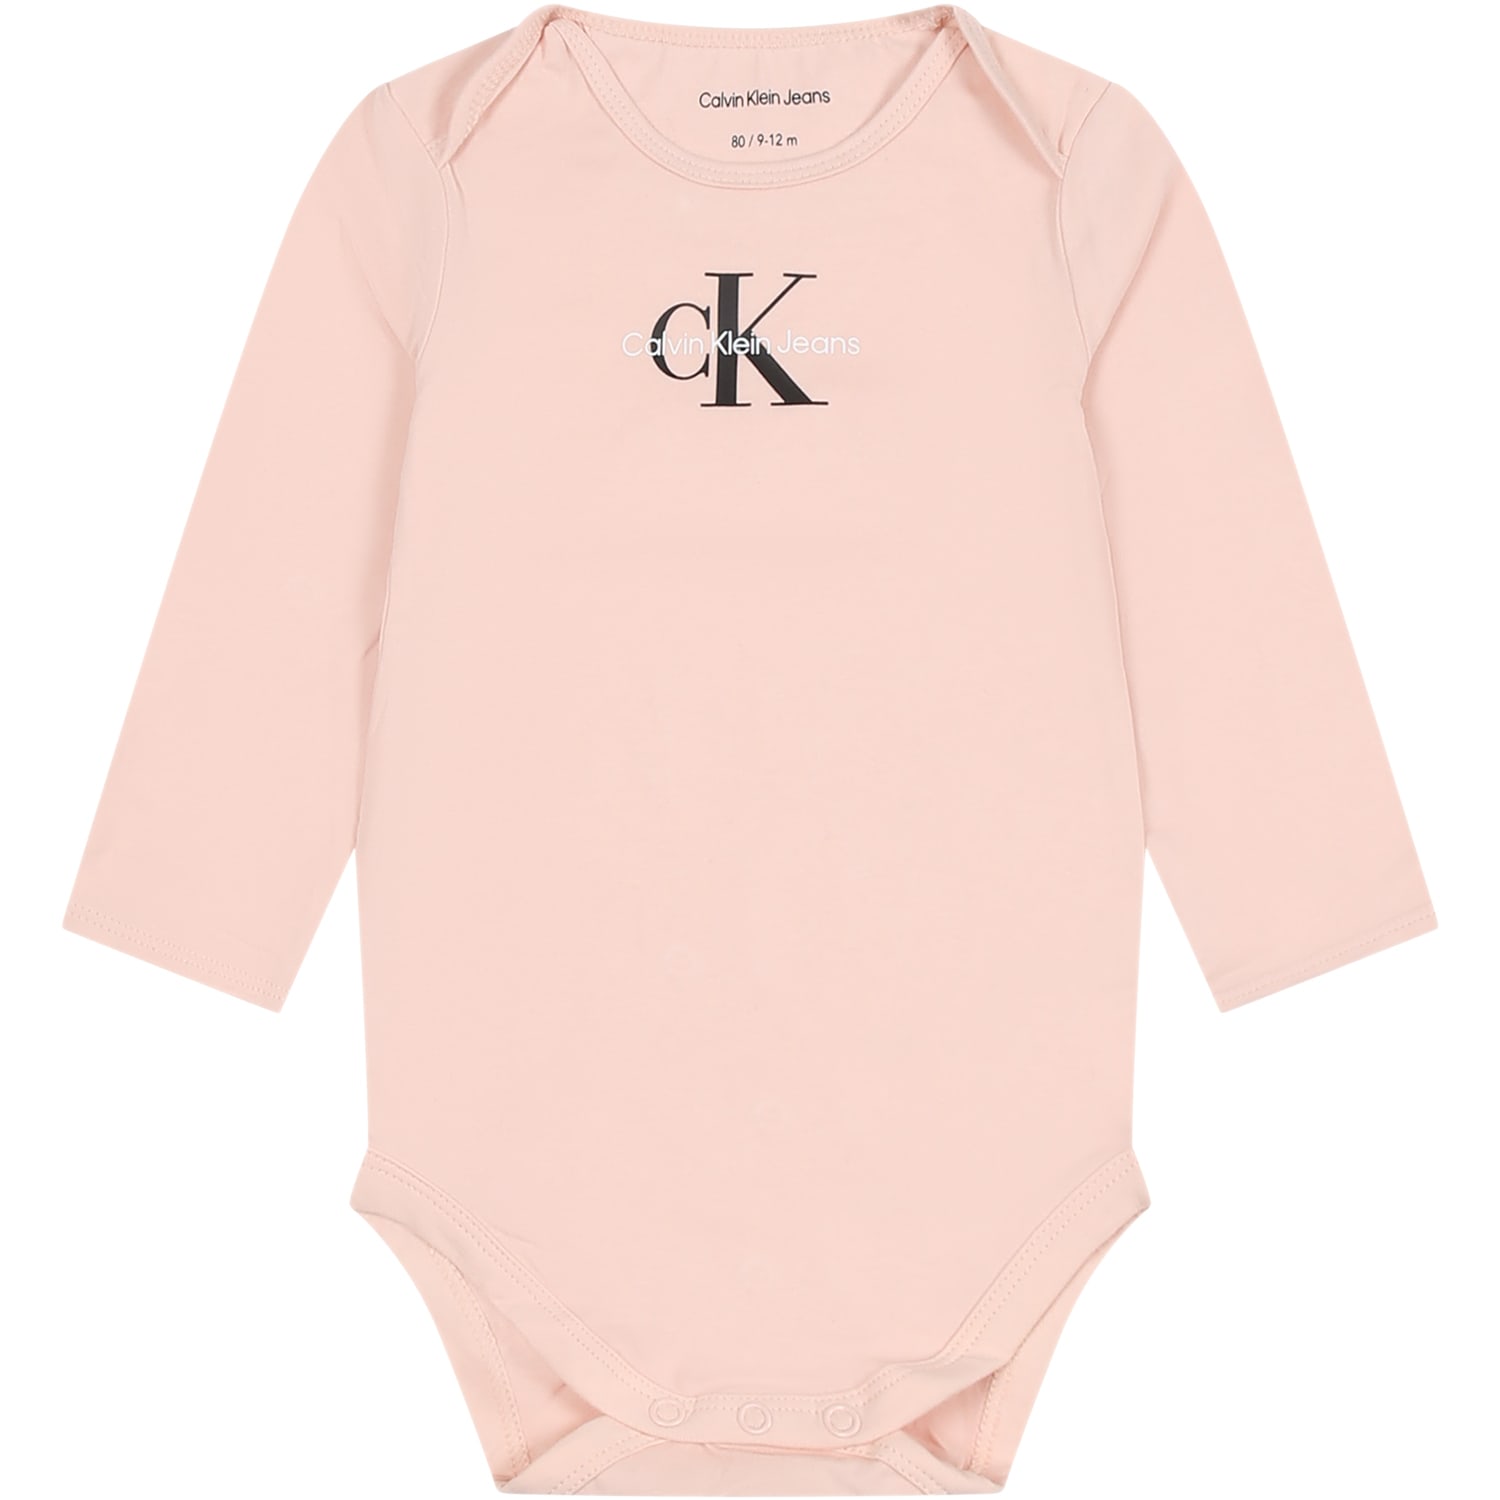 CALVIN KLEIN PINK BODY FOR BABY GIRL WITH LOGO